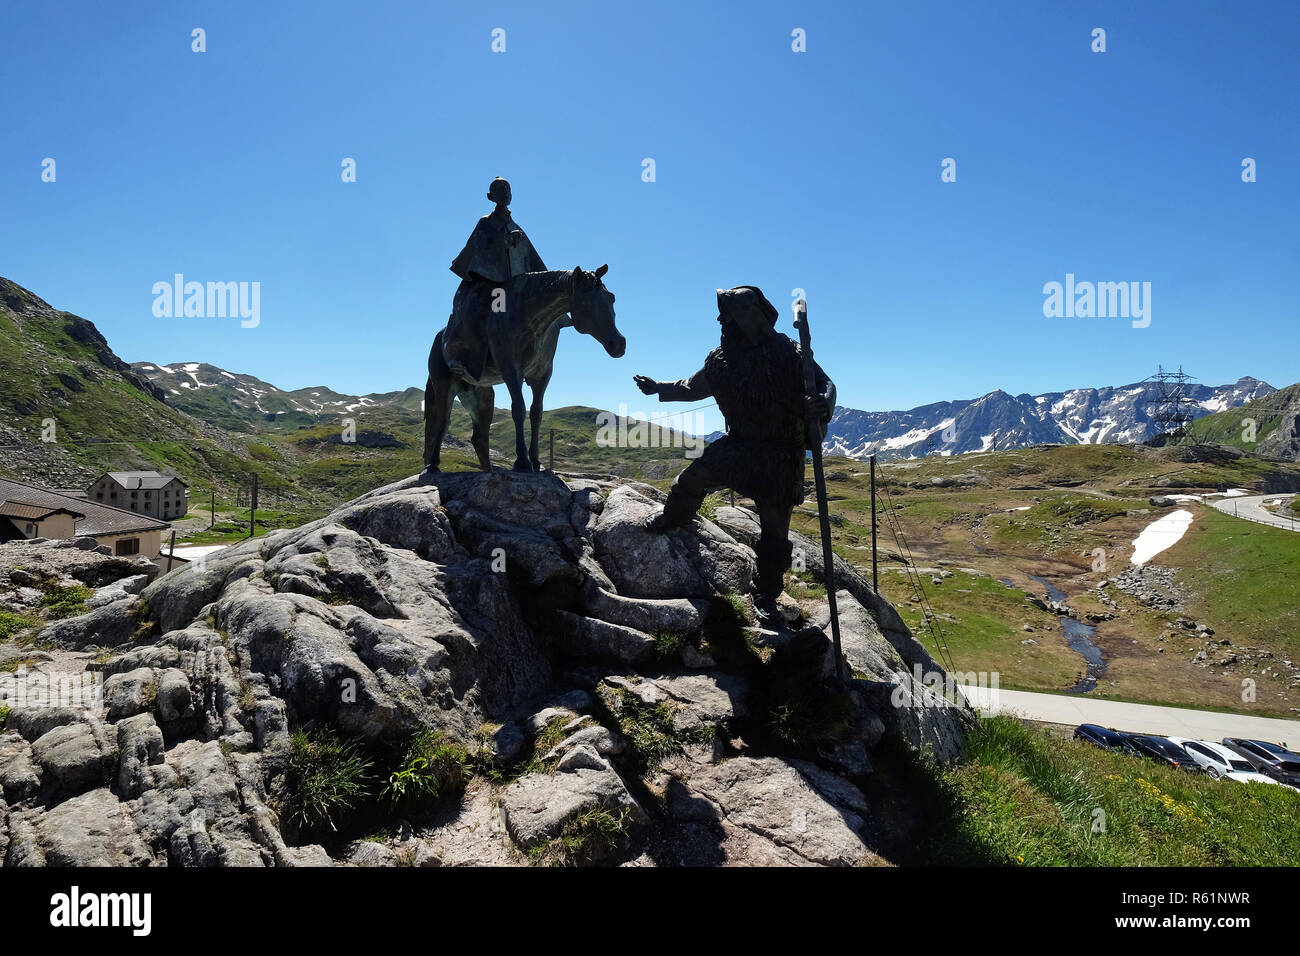 The equestrian statue of General Suvorov on Gotthard pass, Switzerland Stock Photo